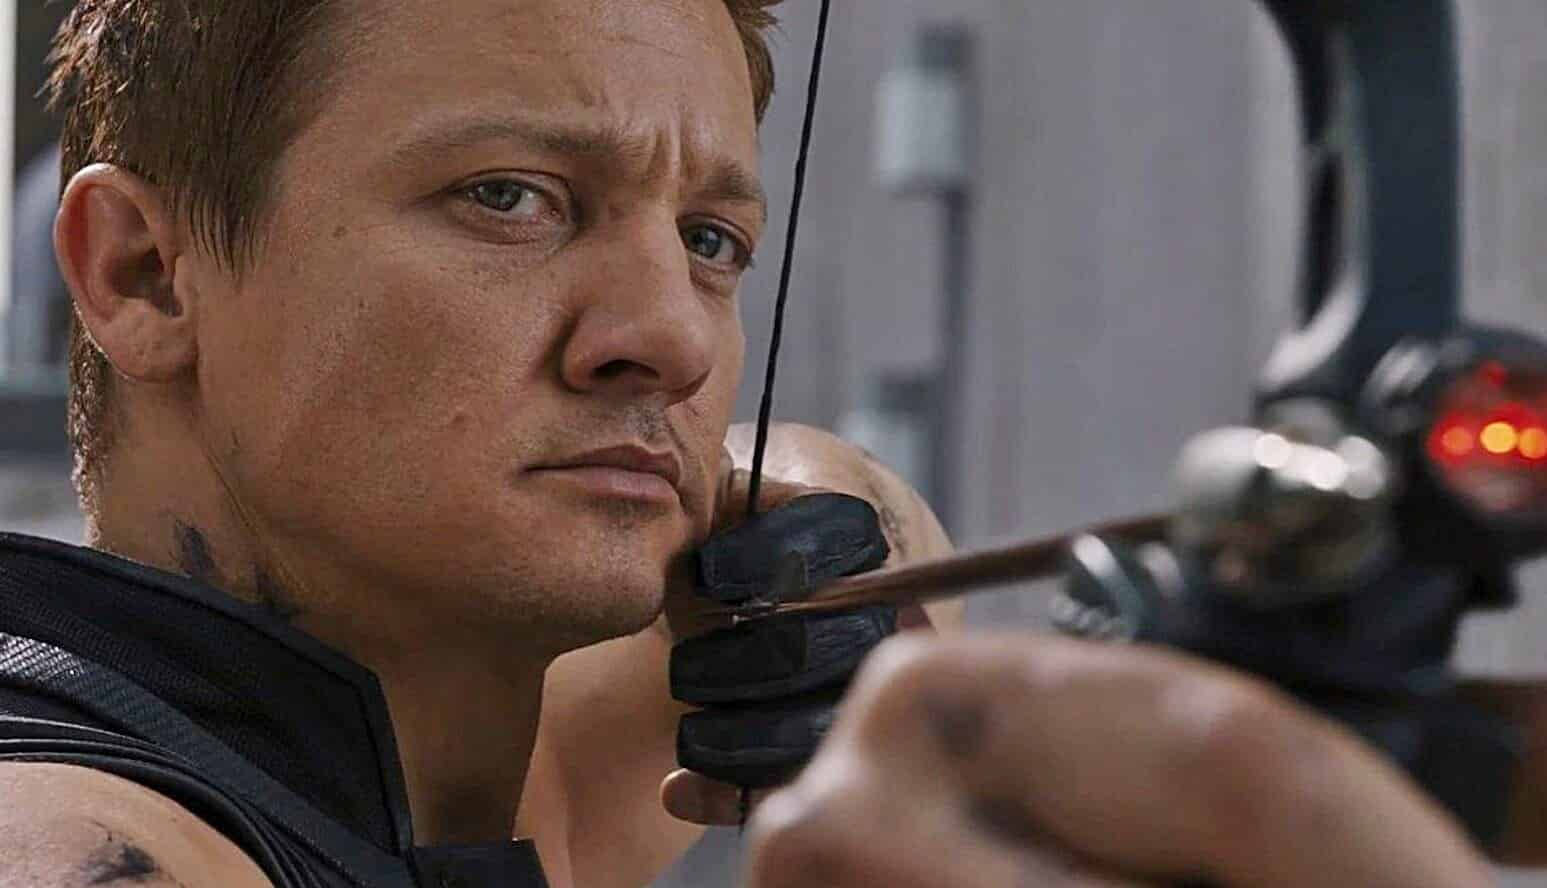 Jeremy Renner Aiming With A Bow Wallpaper